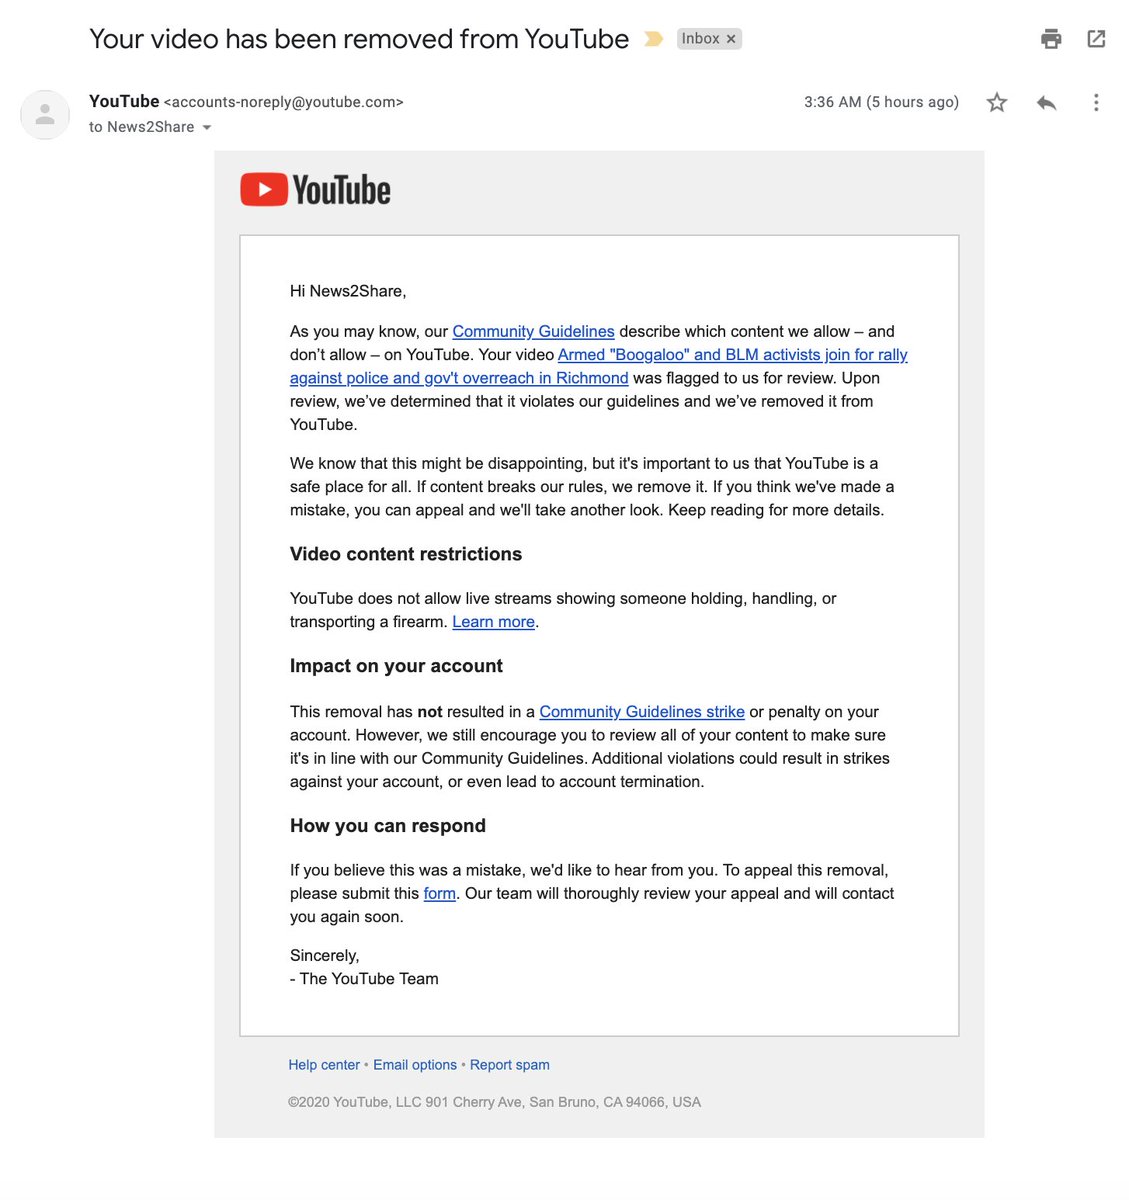 Hi again  @TeamYouTube. This appears to be a genuine glitch/error.Last night I uploaded my documentary news video of the unusual protest that occurred yesterday. It's a ten minute summary, not a livestream, but was removed for a policy on livestreams. I appealed. Please fix.